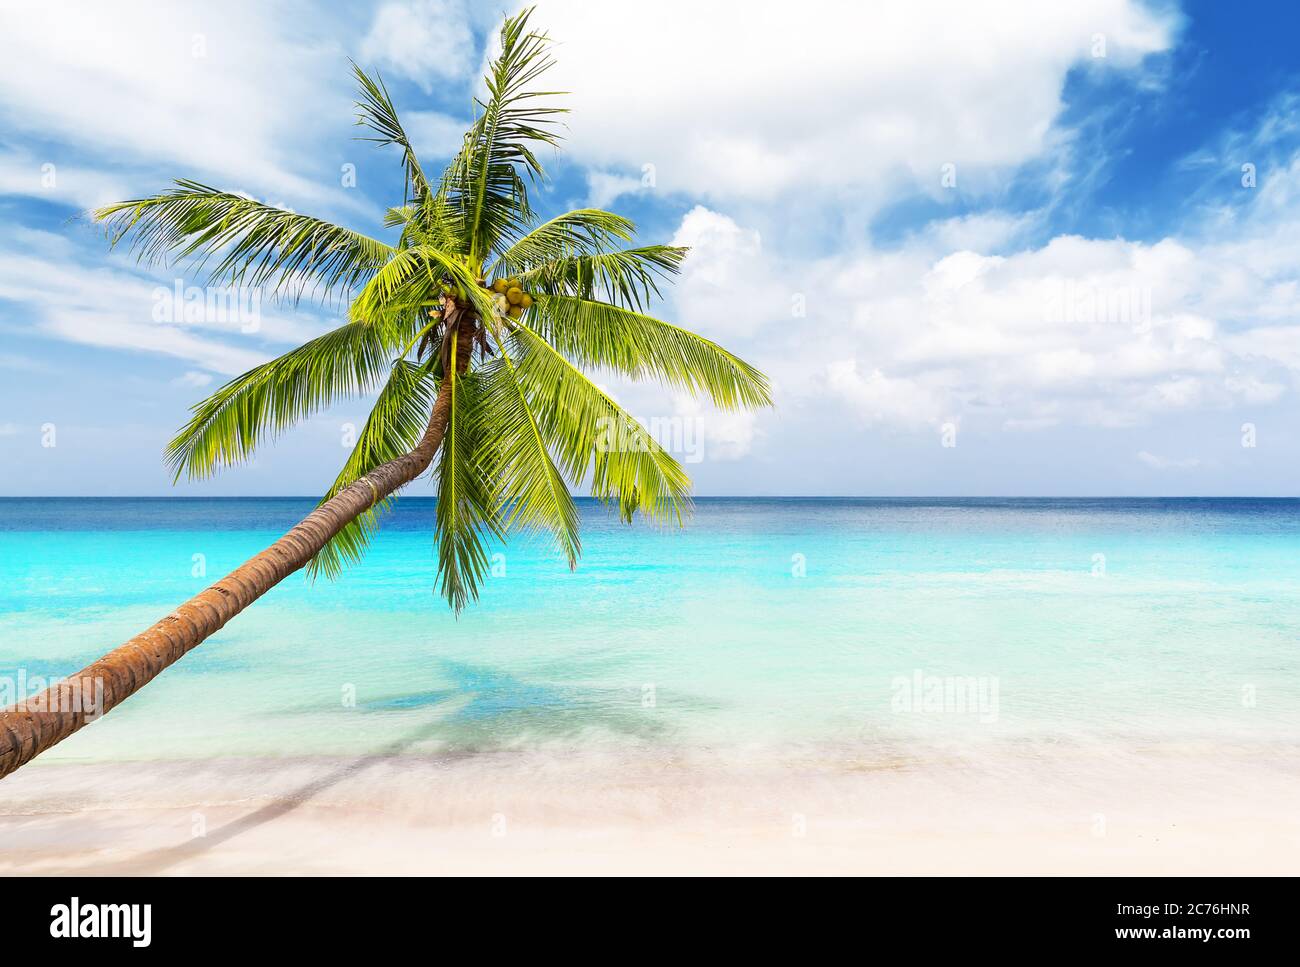 Coconut Palm trees on white sandy beach in Punta Cana, Dominican Republic. Vacation holidays background wallpaper. View of nice tropical beach. Stock Photo